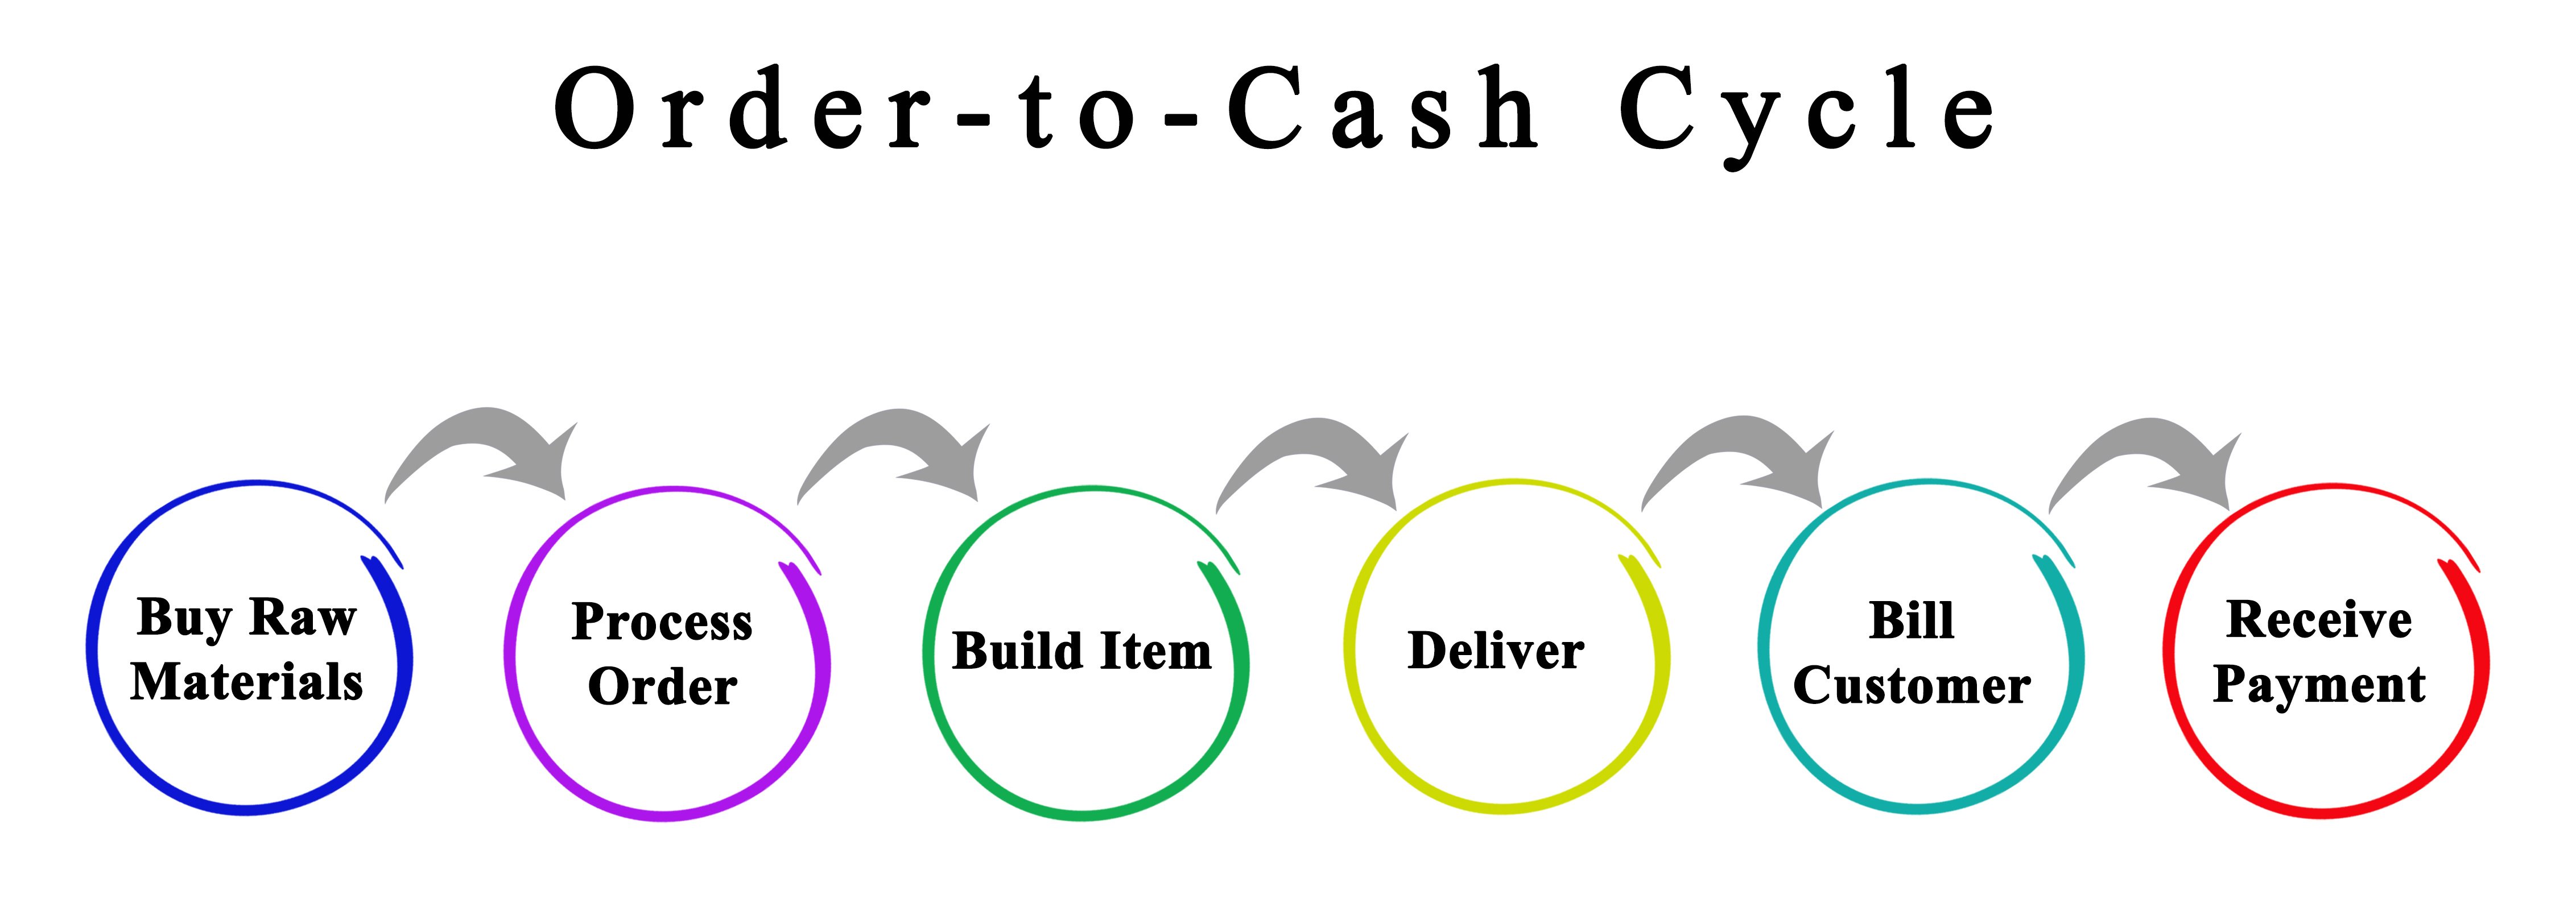 order-to-cash